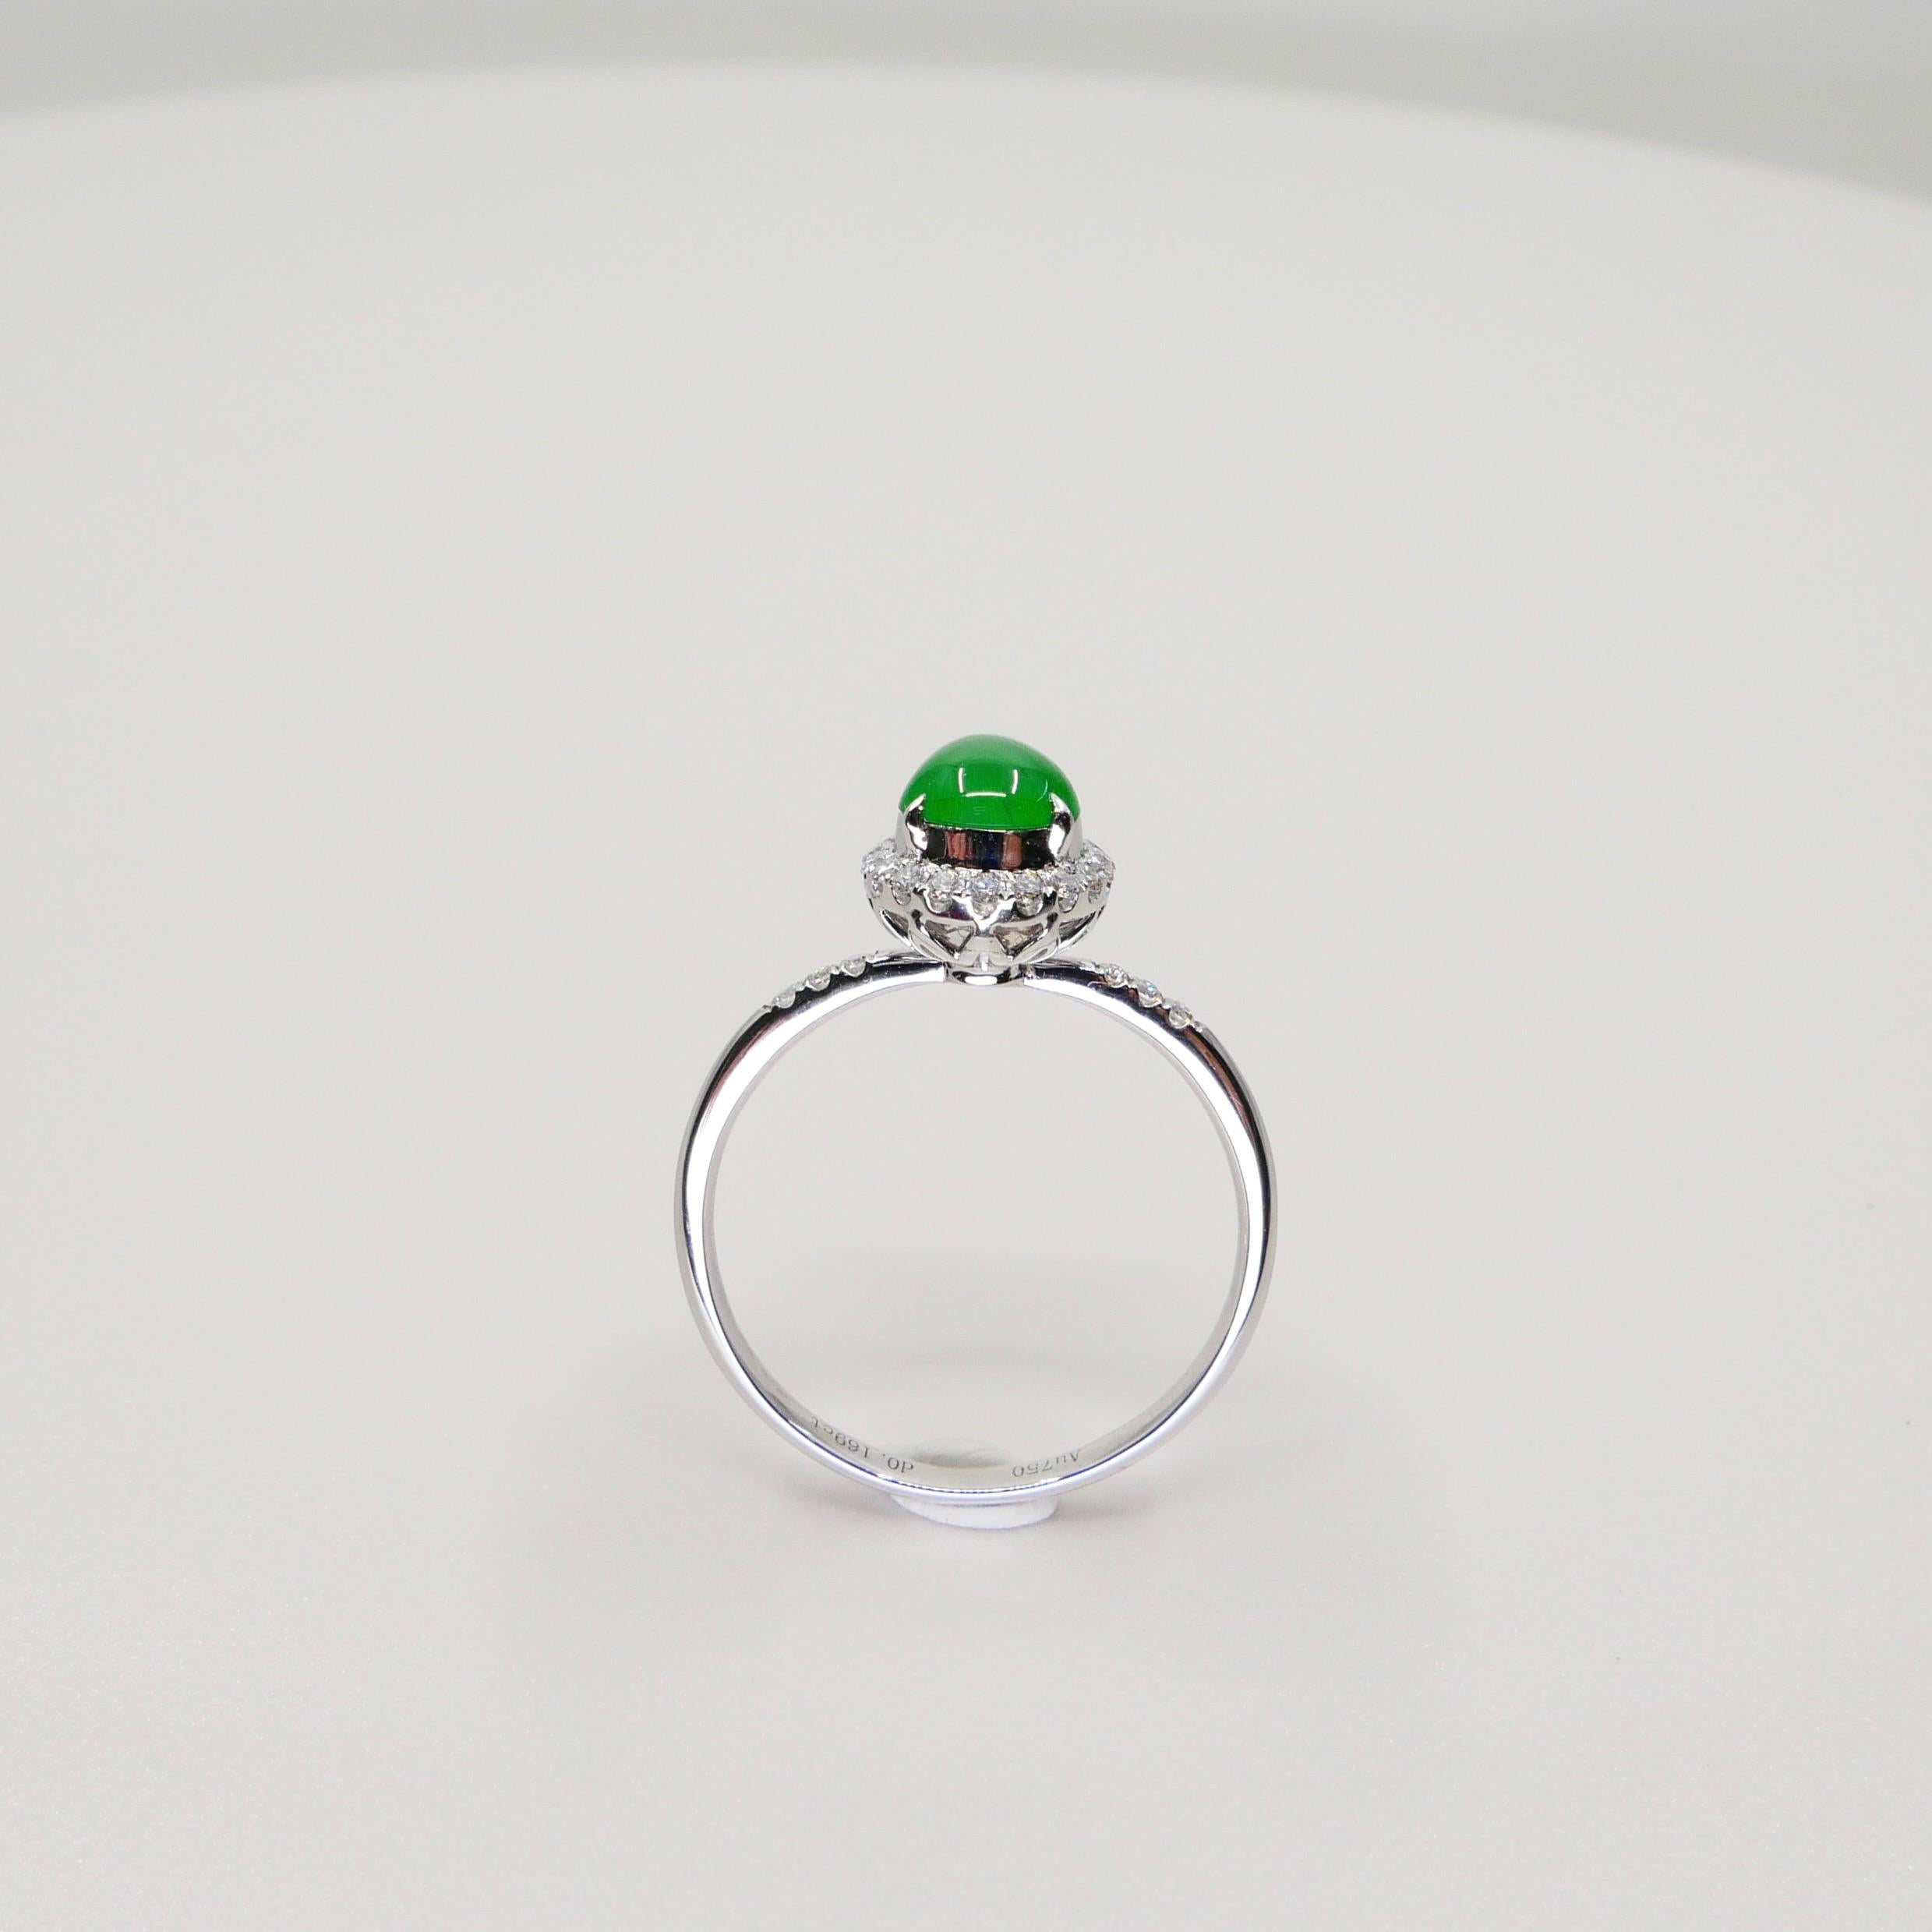 Women's Certified Jade & Diamond Ring, Almost Imperial Green Color, Dainty, Superb Glow For Sale